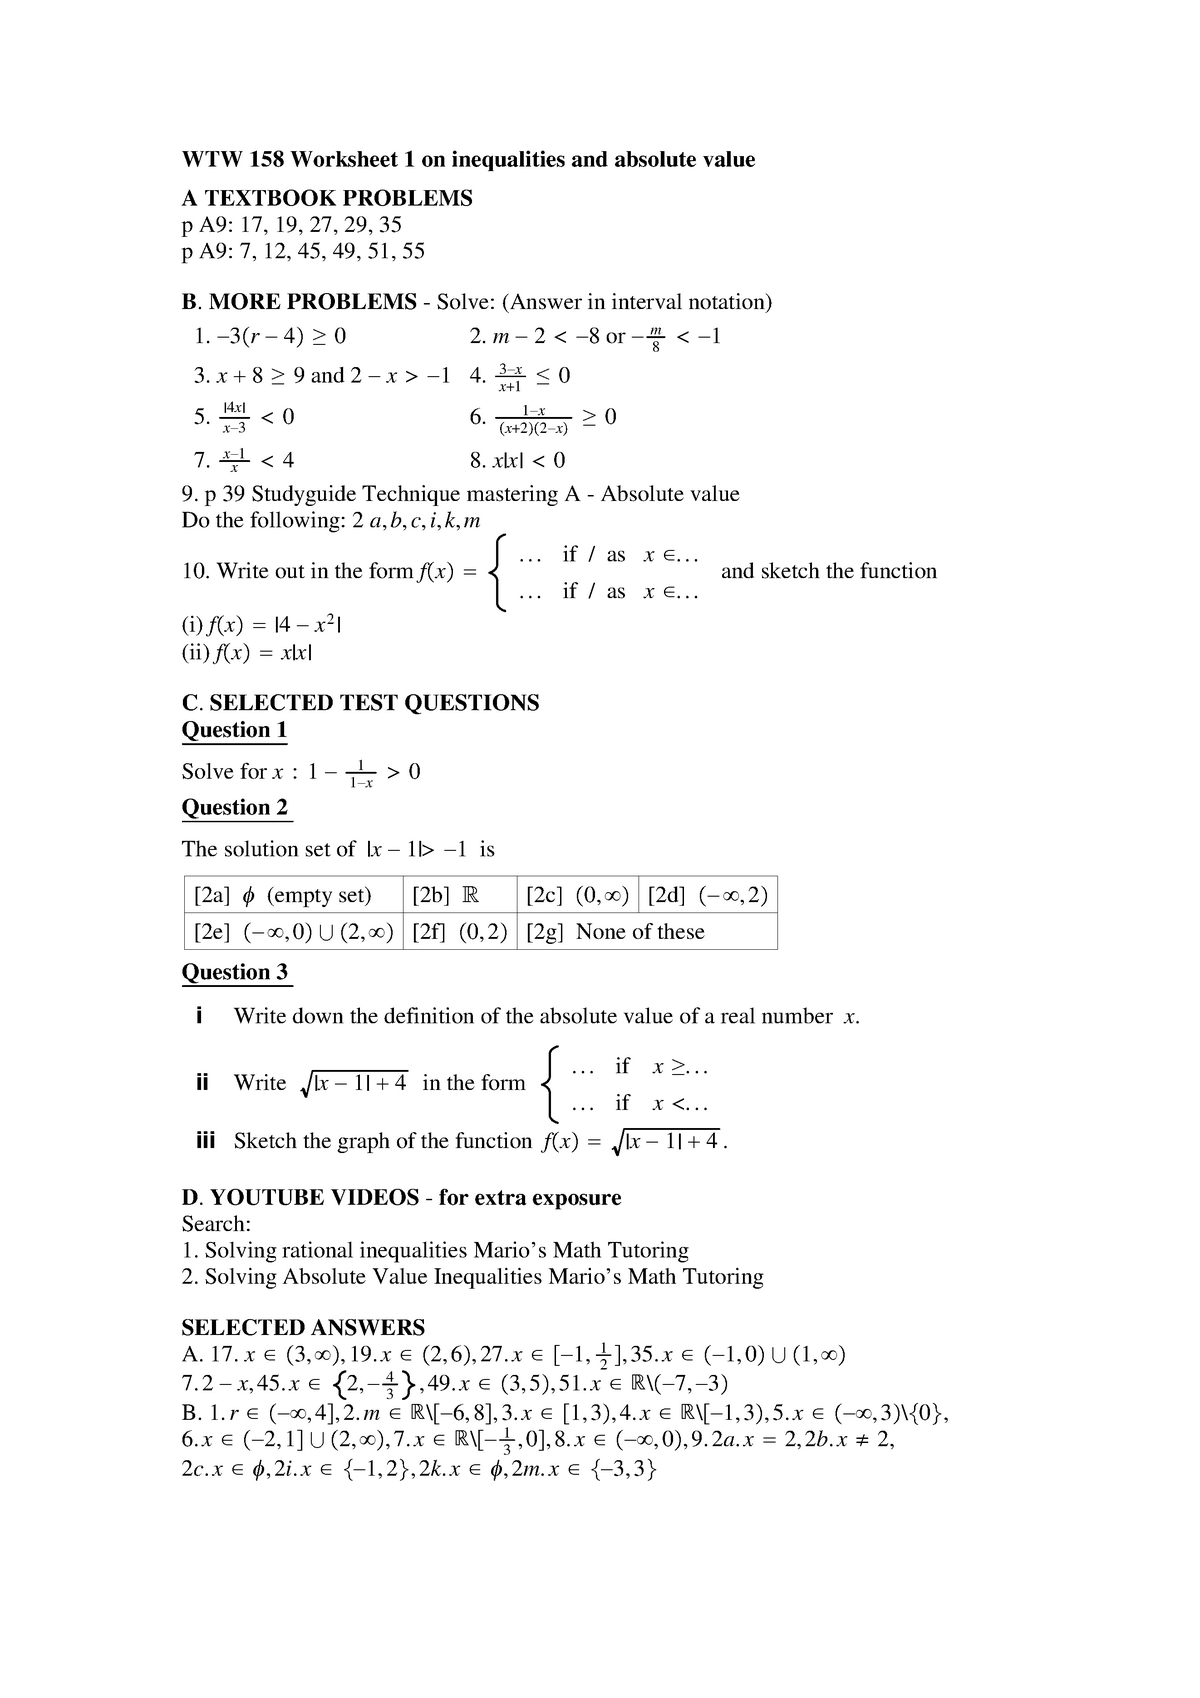 Worksheet 25 on inequalities and absolute value - Calculus 2558 For Absolute Value Inequalities Worksheet Answers